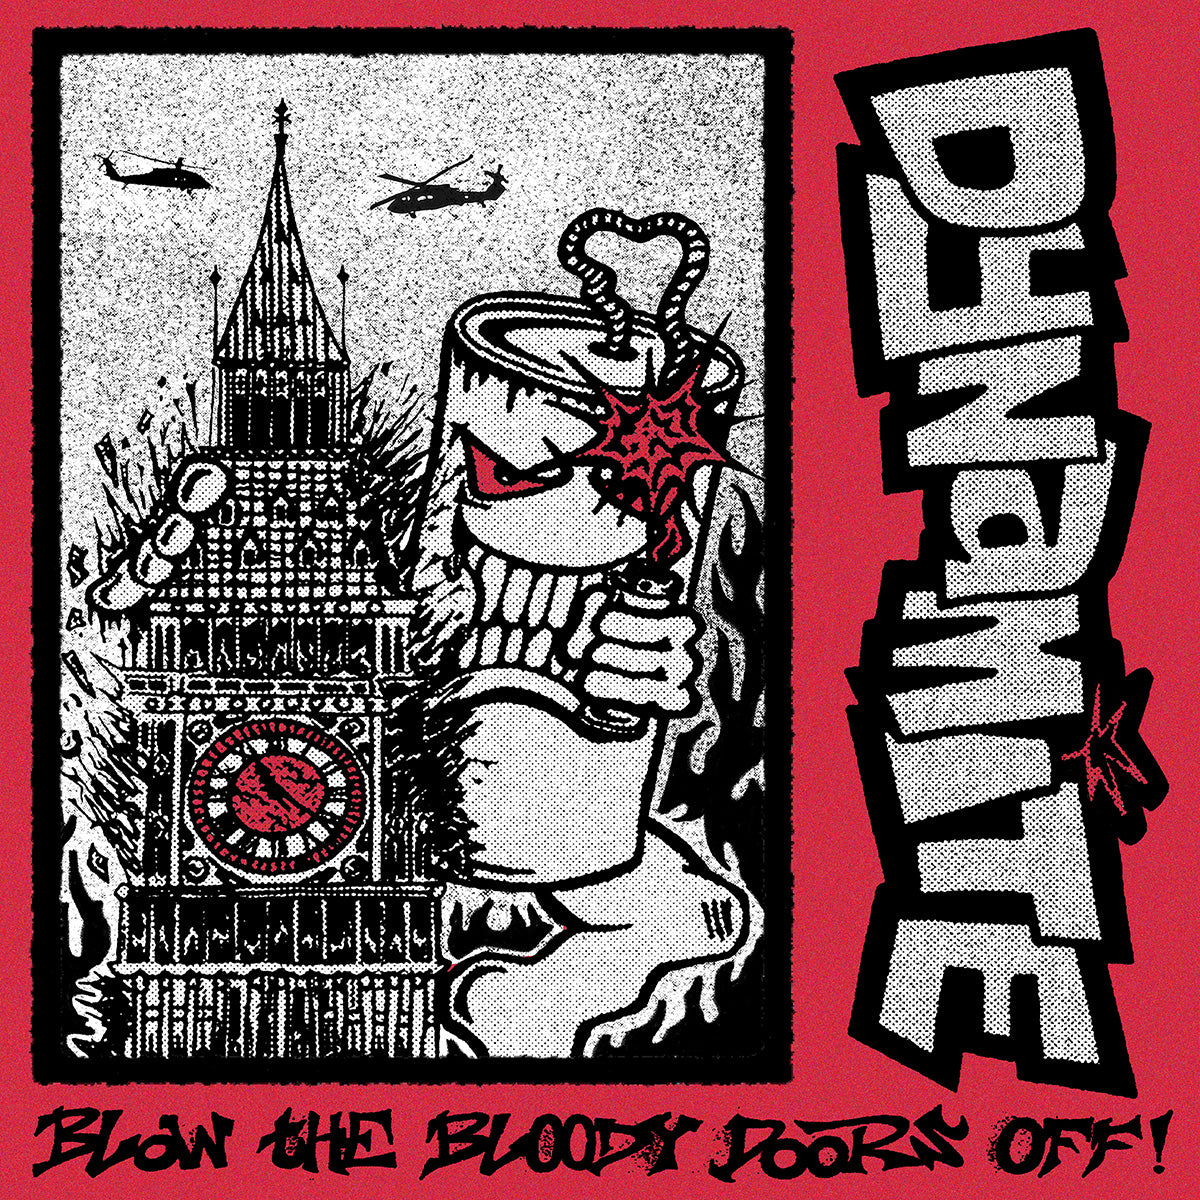 DYNAMITE "Blow The Bloody Doors Off" 7"